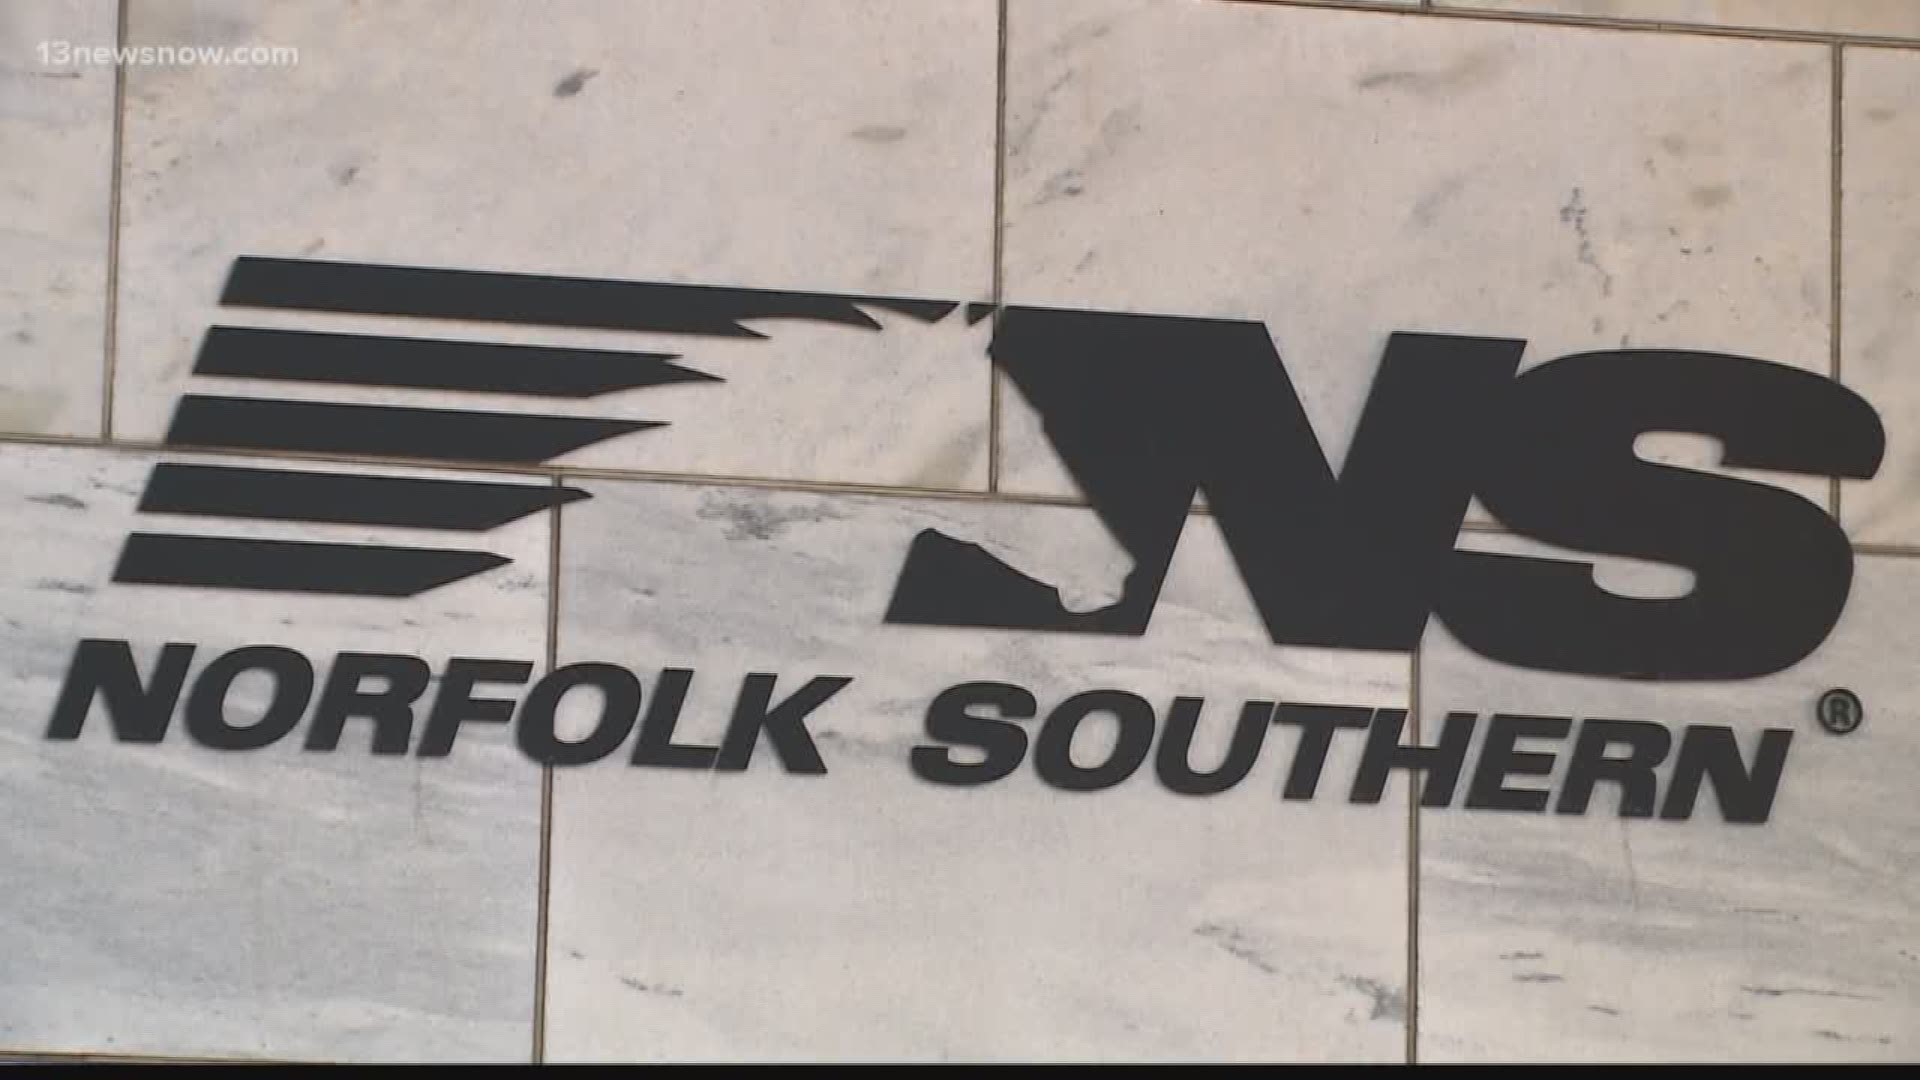 Norfolk Southern is moving its headquarters and hundreds of jobs to Atlanta.